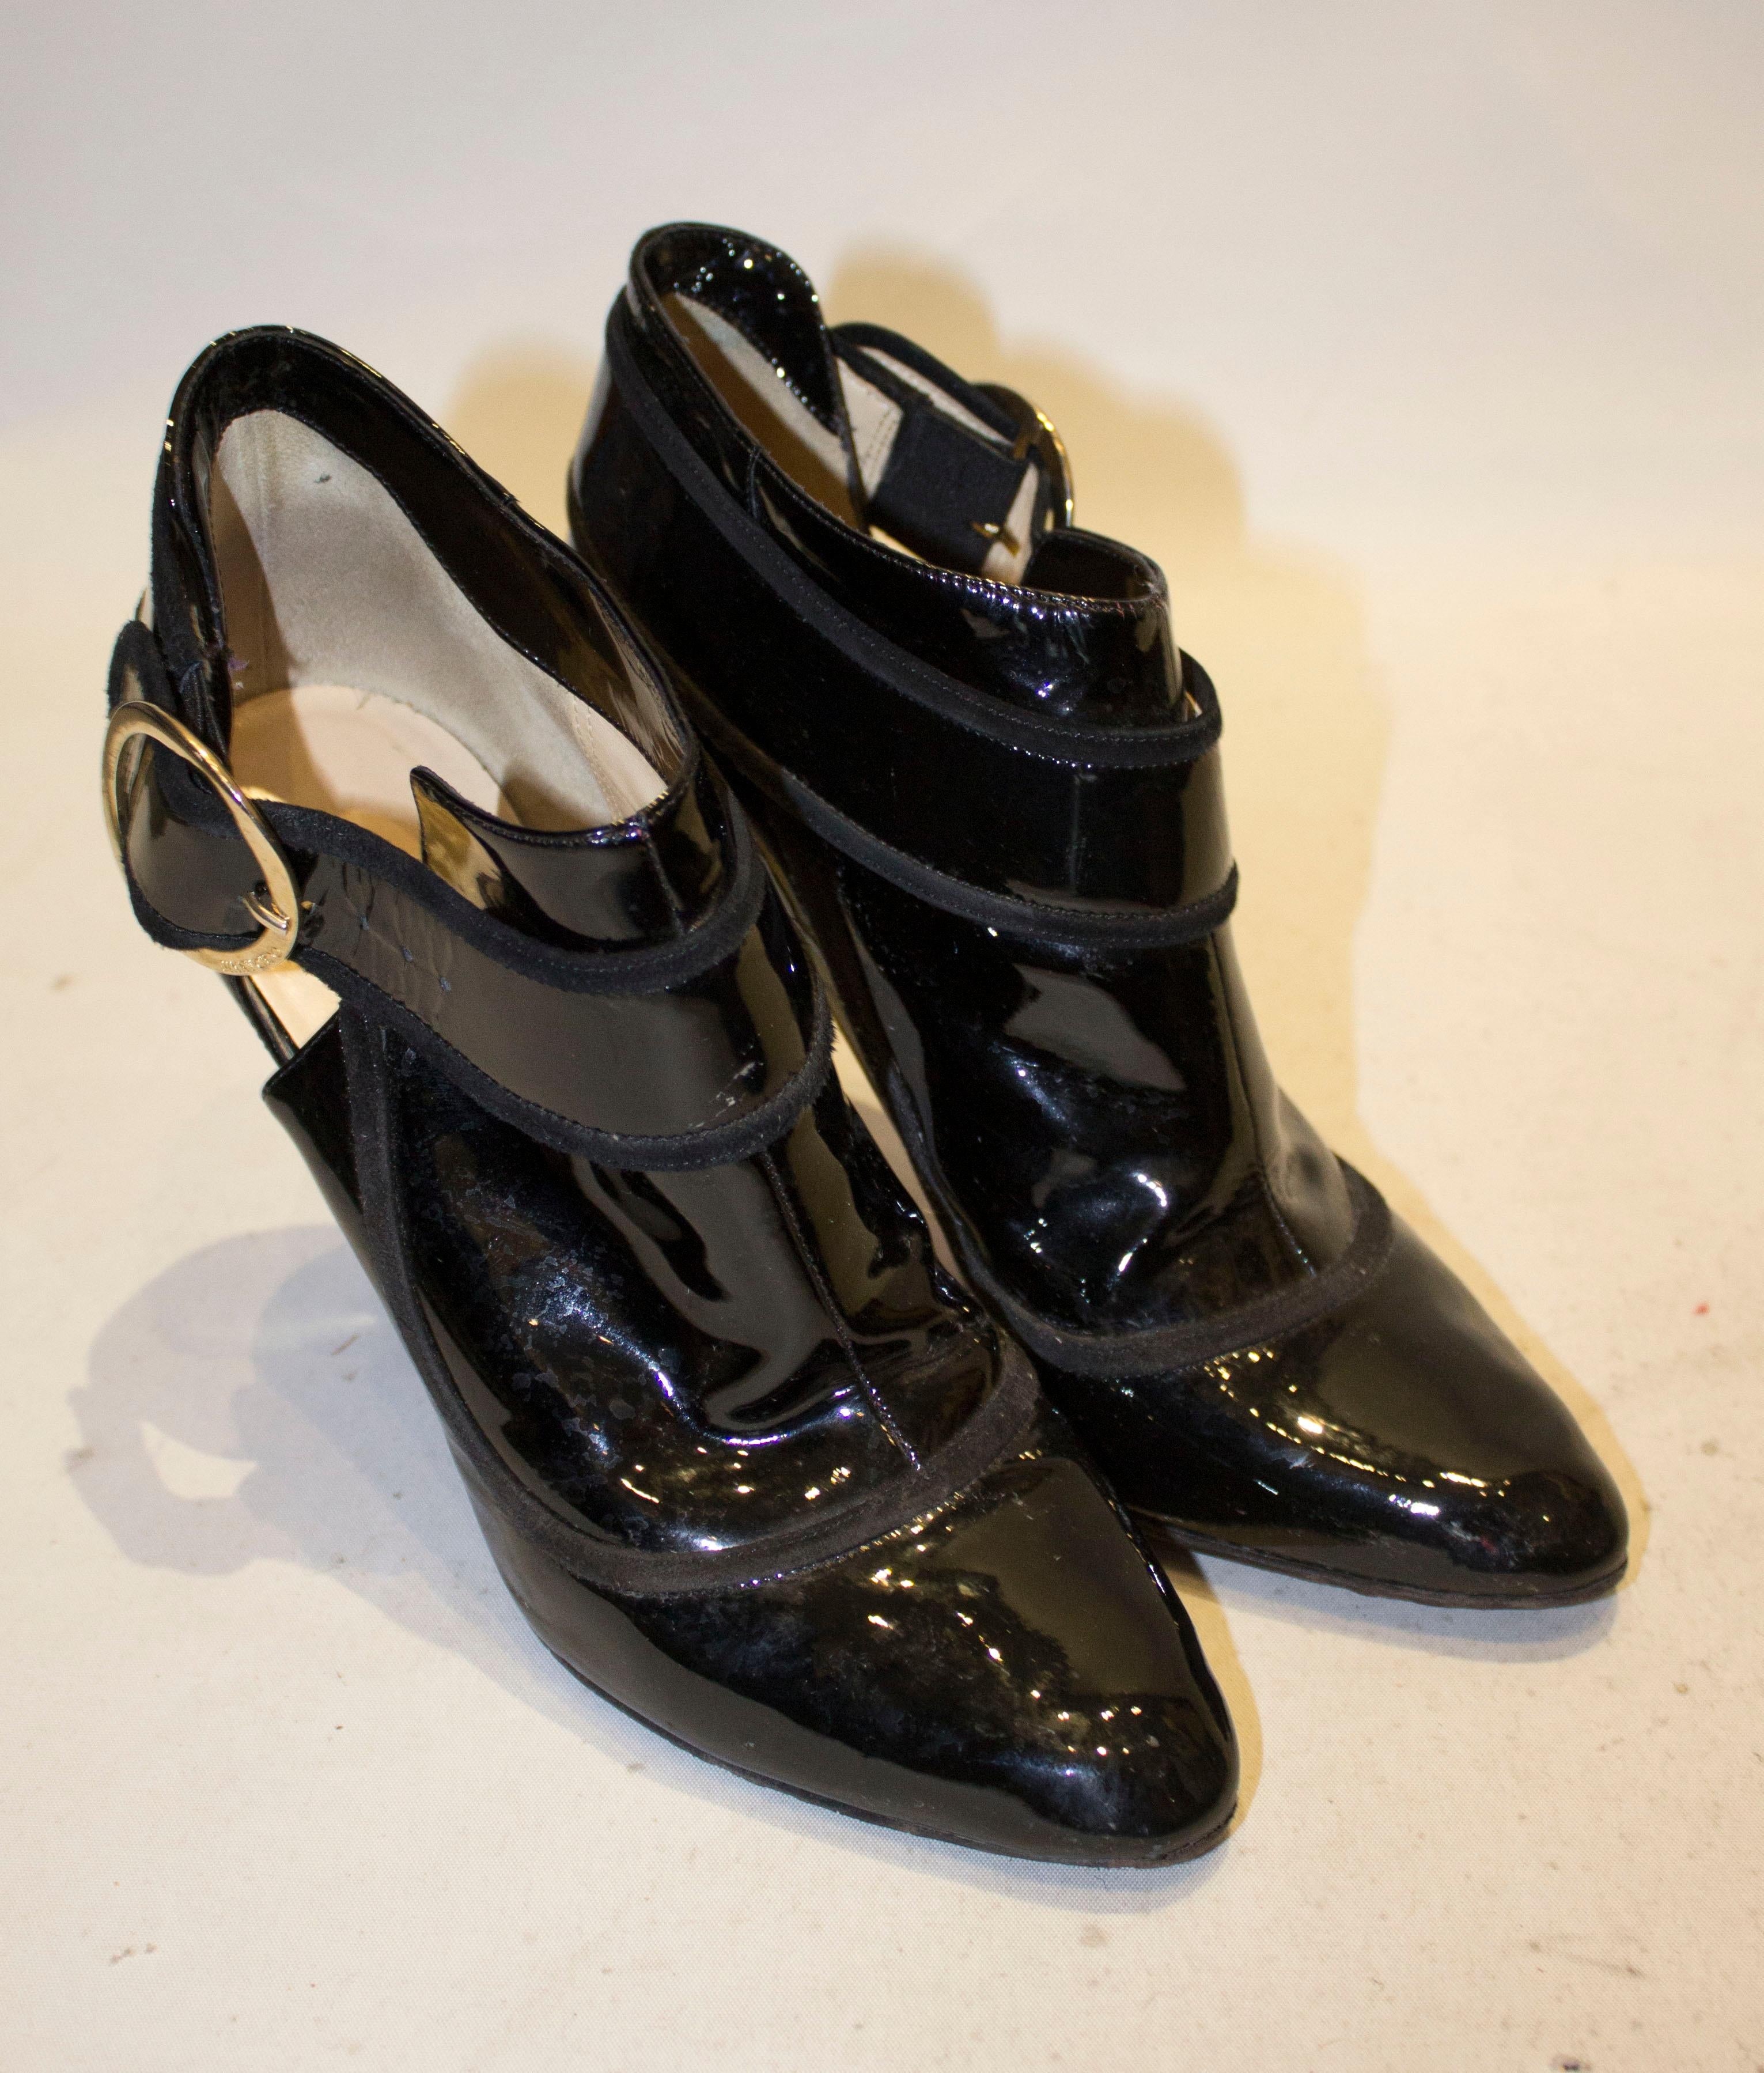 Women's Jimmy Choo Black Patent Ankle Boots